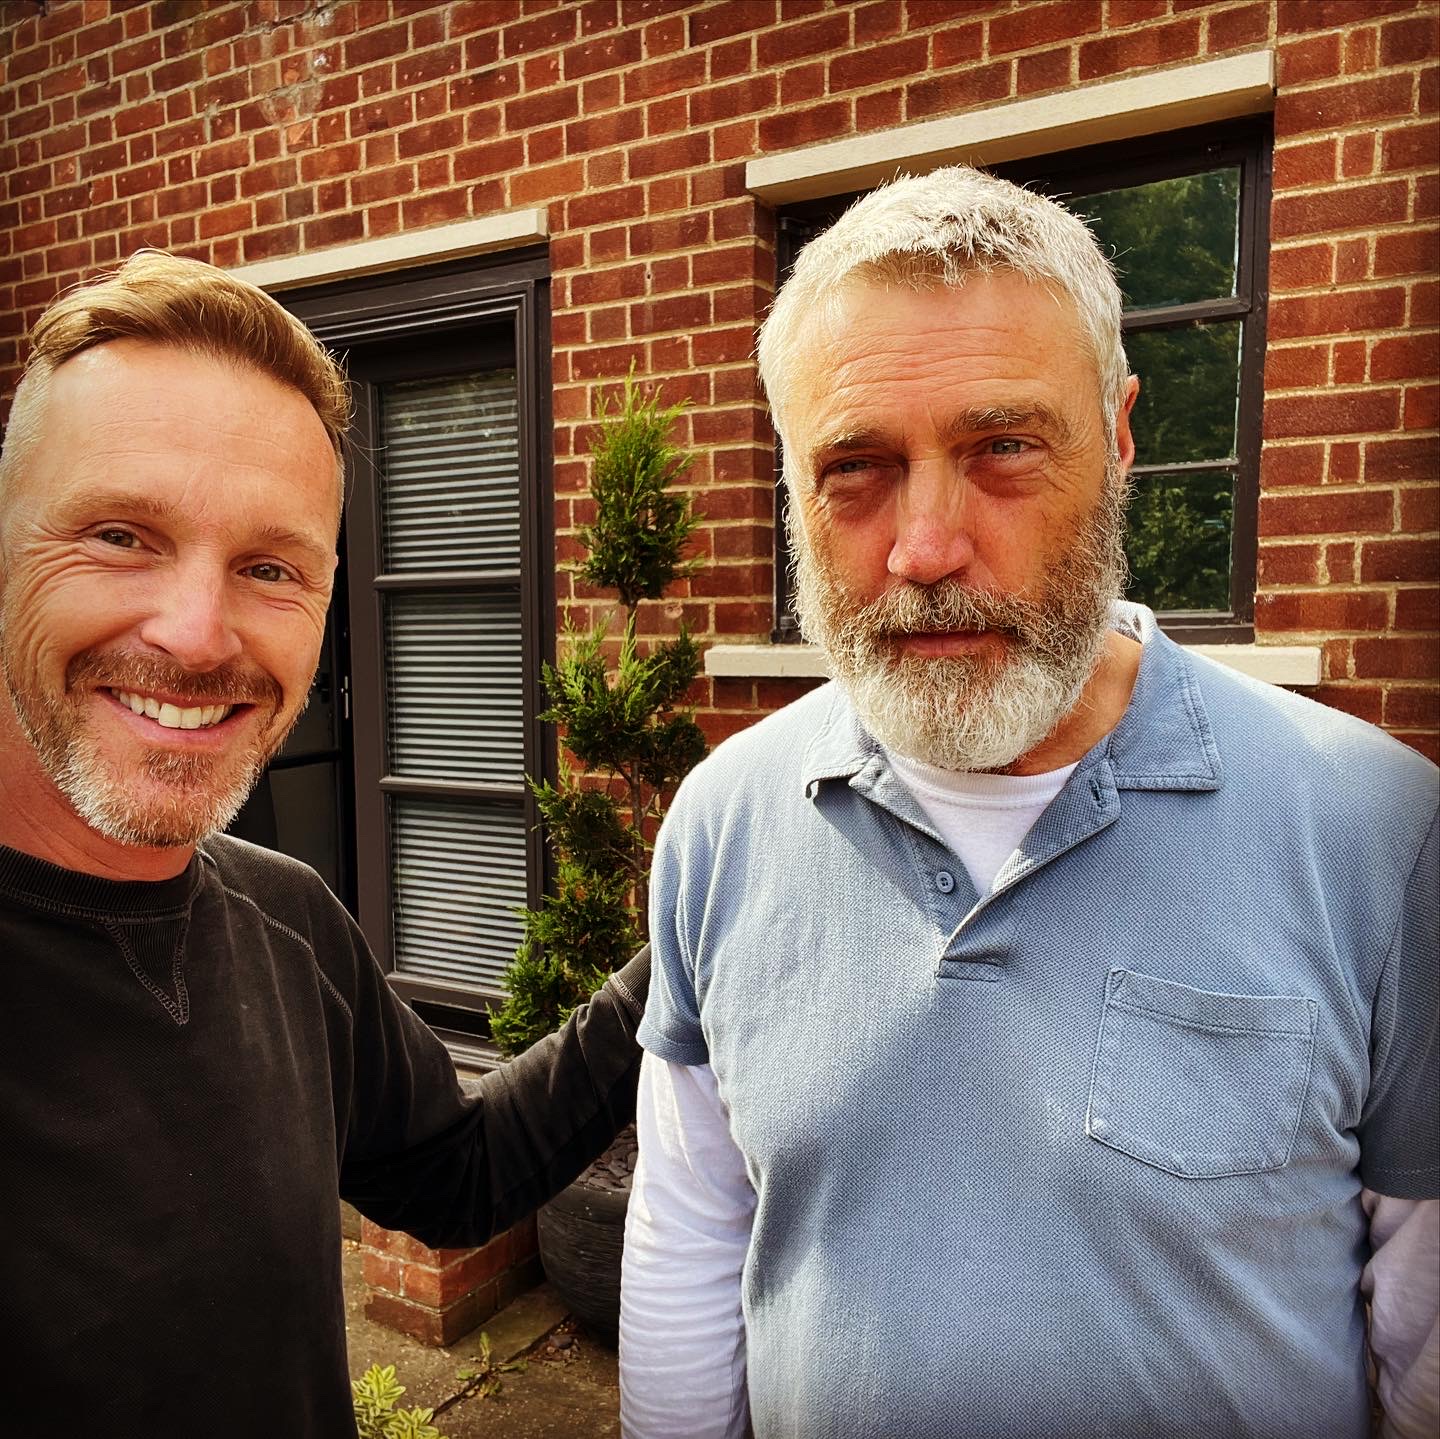 Sept 2021 – ADR work with ITV Drama and Legendary actor Vincent Regan